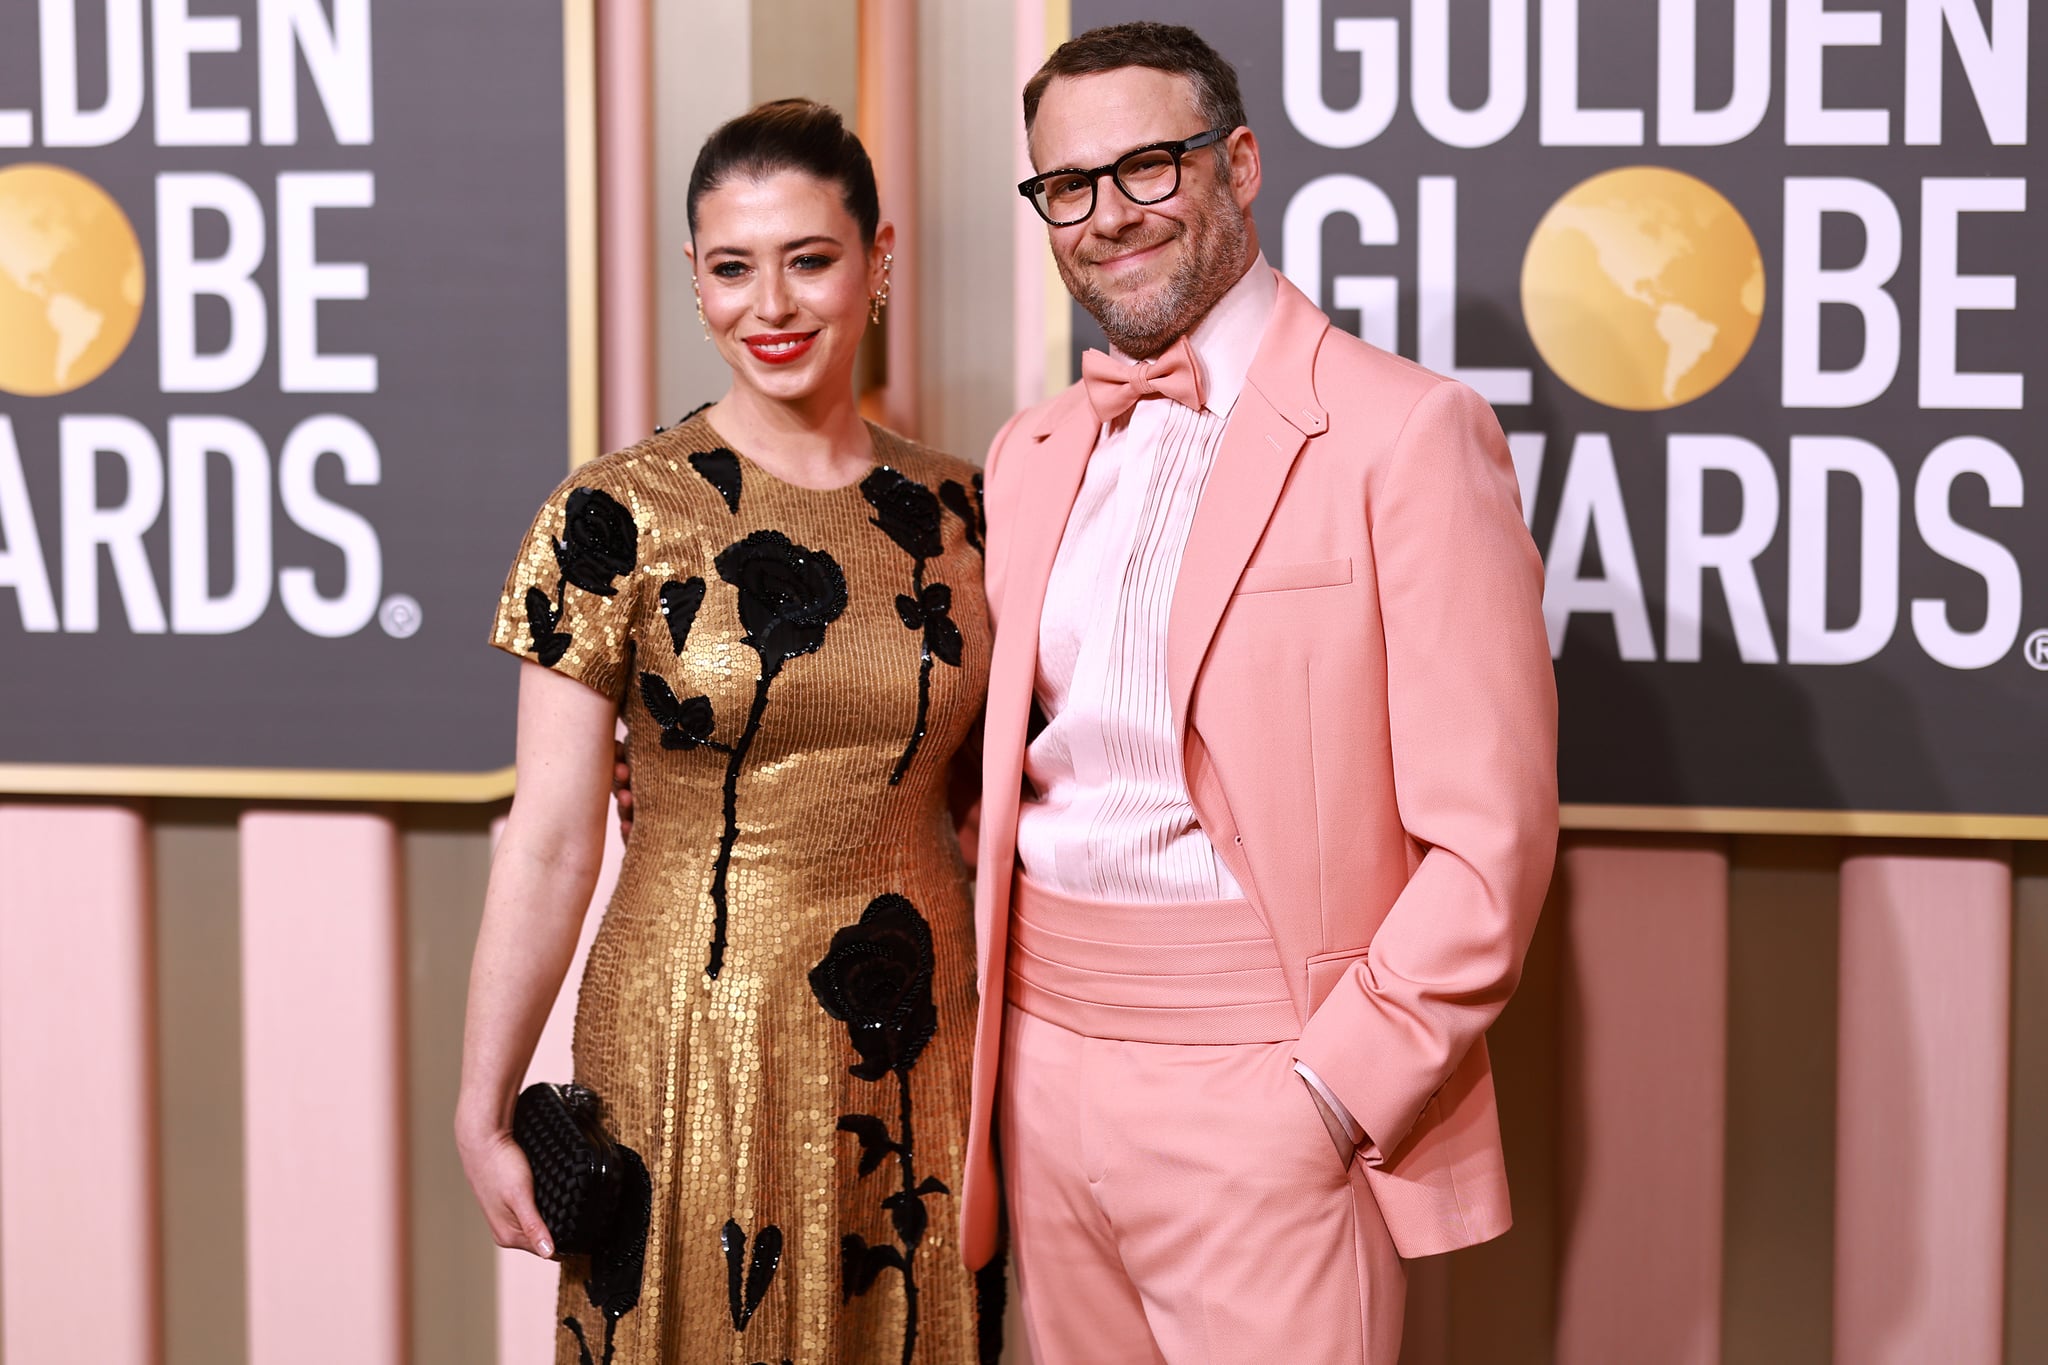 BEVERLY HILLS, CALIFORNIA - JANUARY 10: (L-R) Lauren Miller and Seth Rogen attend the 80th Annual Golden Globe Awards at The Beverly Hilton on January 10, 2023 in Beverly Hills, California. (Photo by Matt Winkelmeyer/FilmMagic)